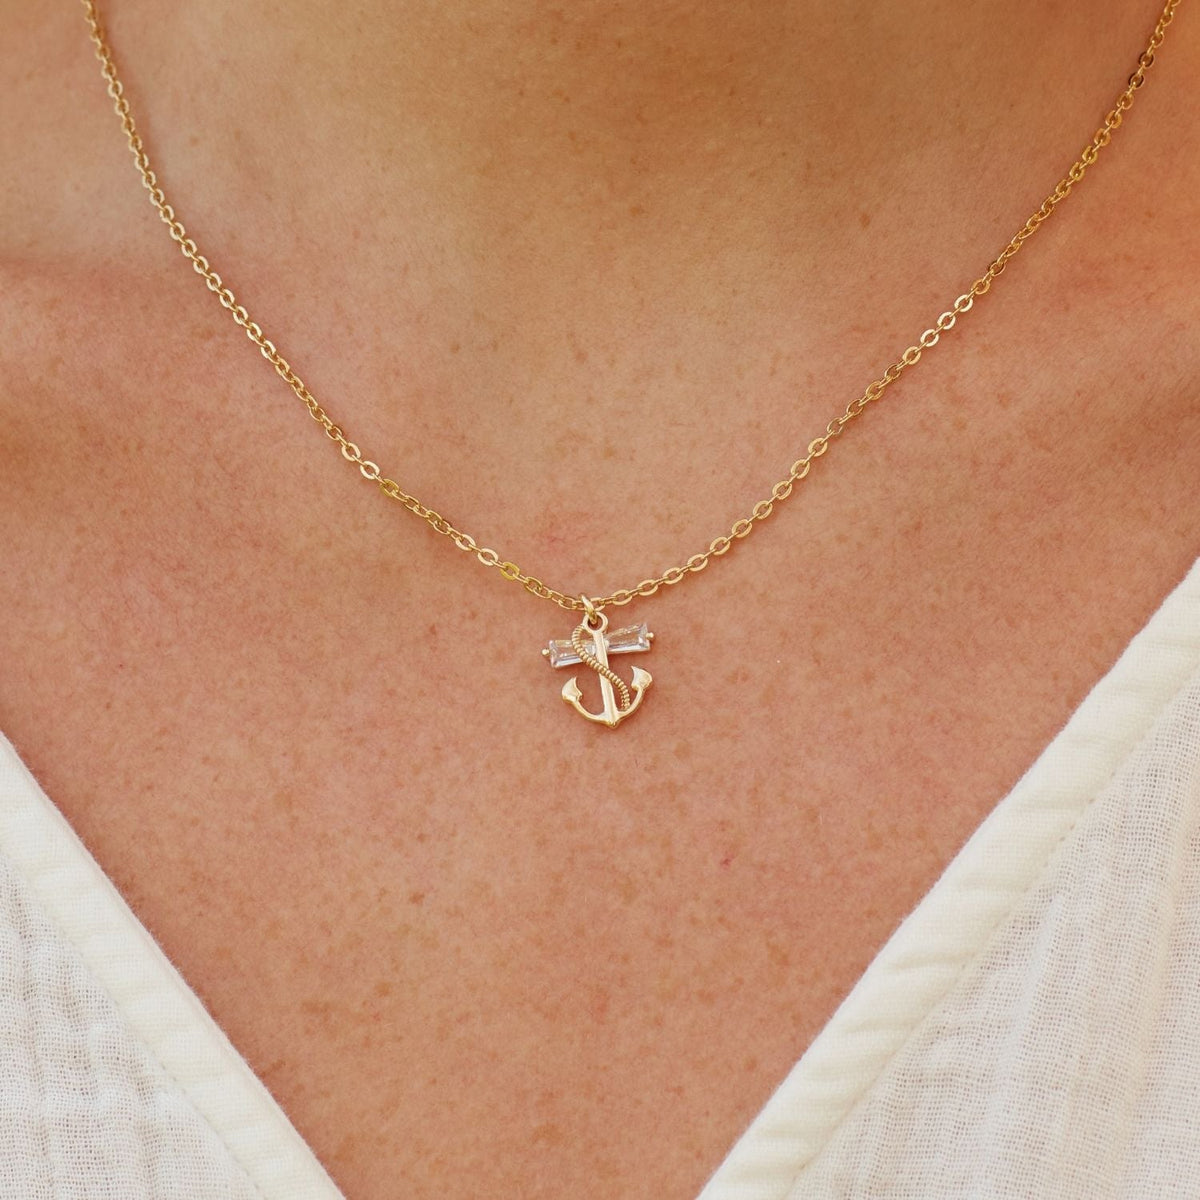 To My Beautiful Daughter | Peace of Jesus | Anchor Necklace